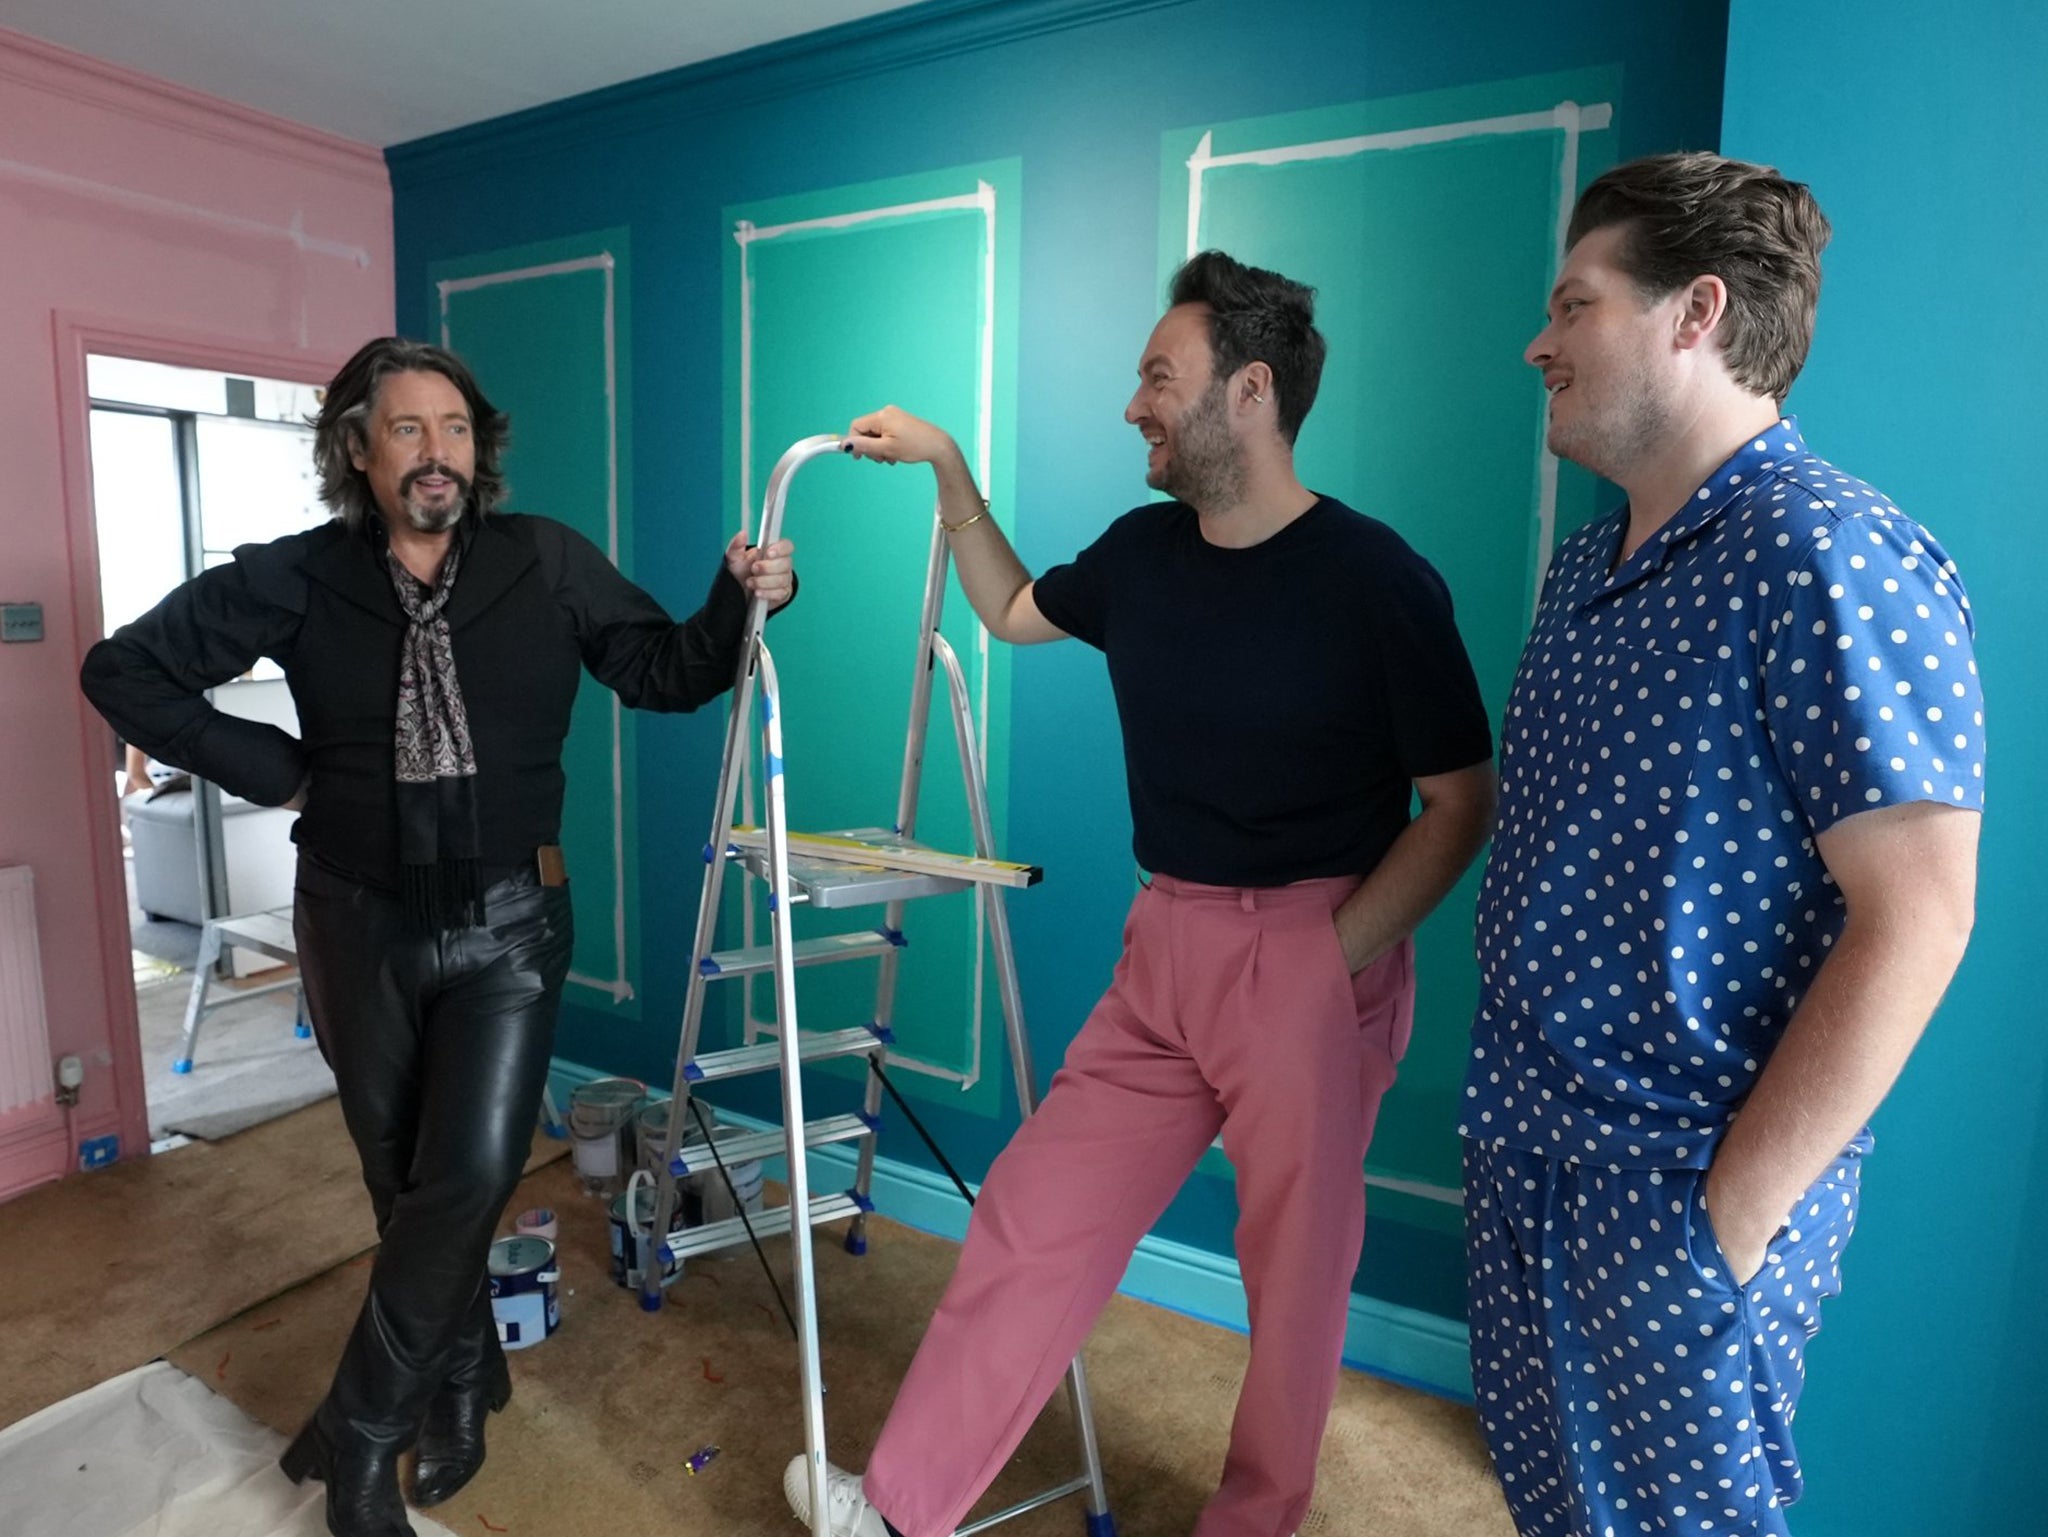 Part dandy highwayman, part sex dungeon captive: Laurence Llewelyn-Bowen amuses Jordan Cluroe and Russell Whitehead in the rebooted ‘Changing Rooms'